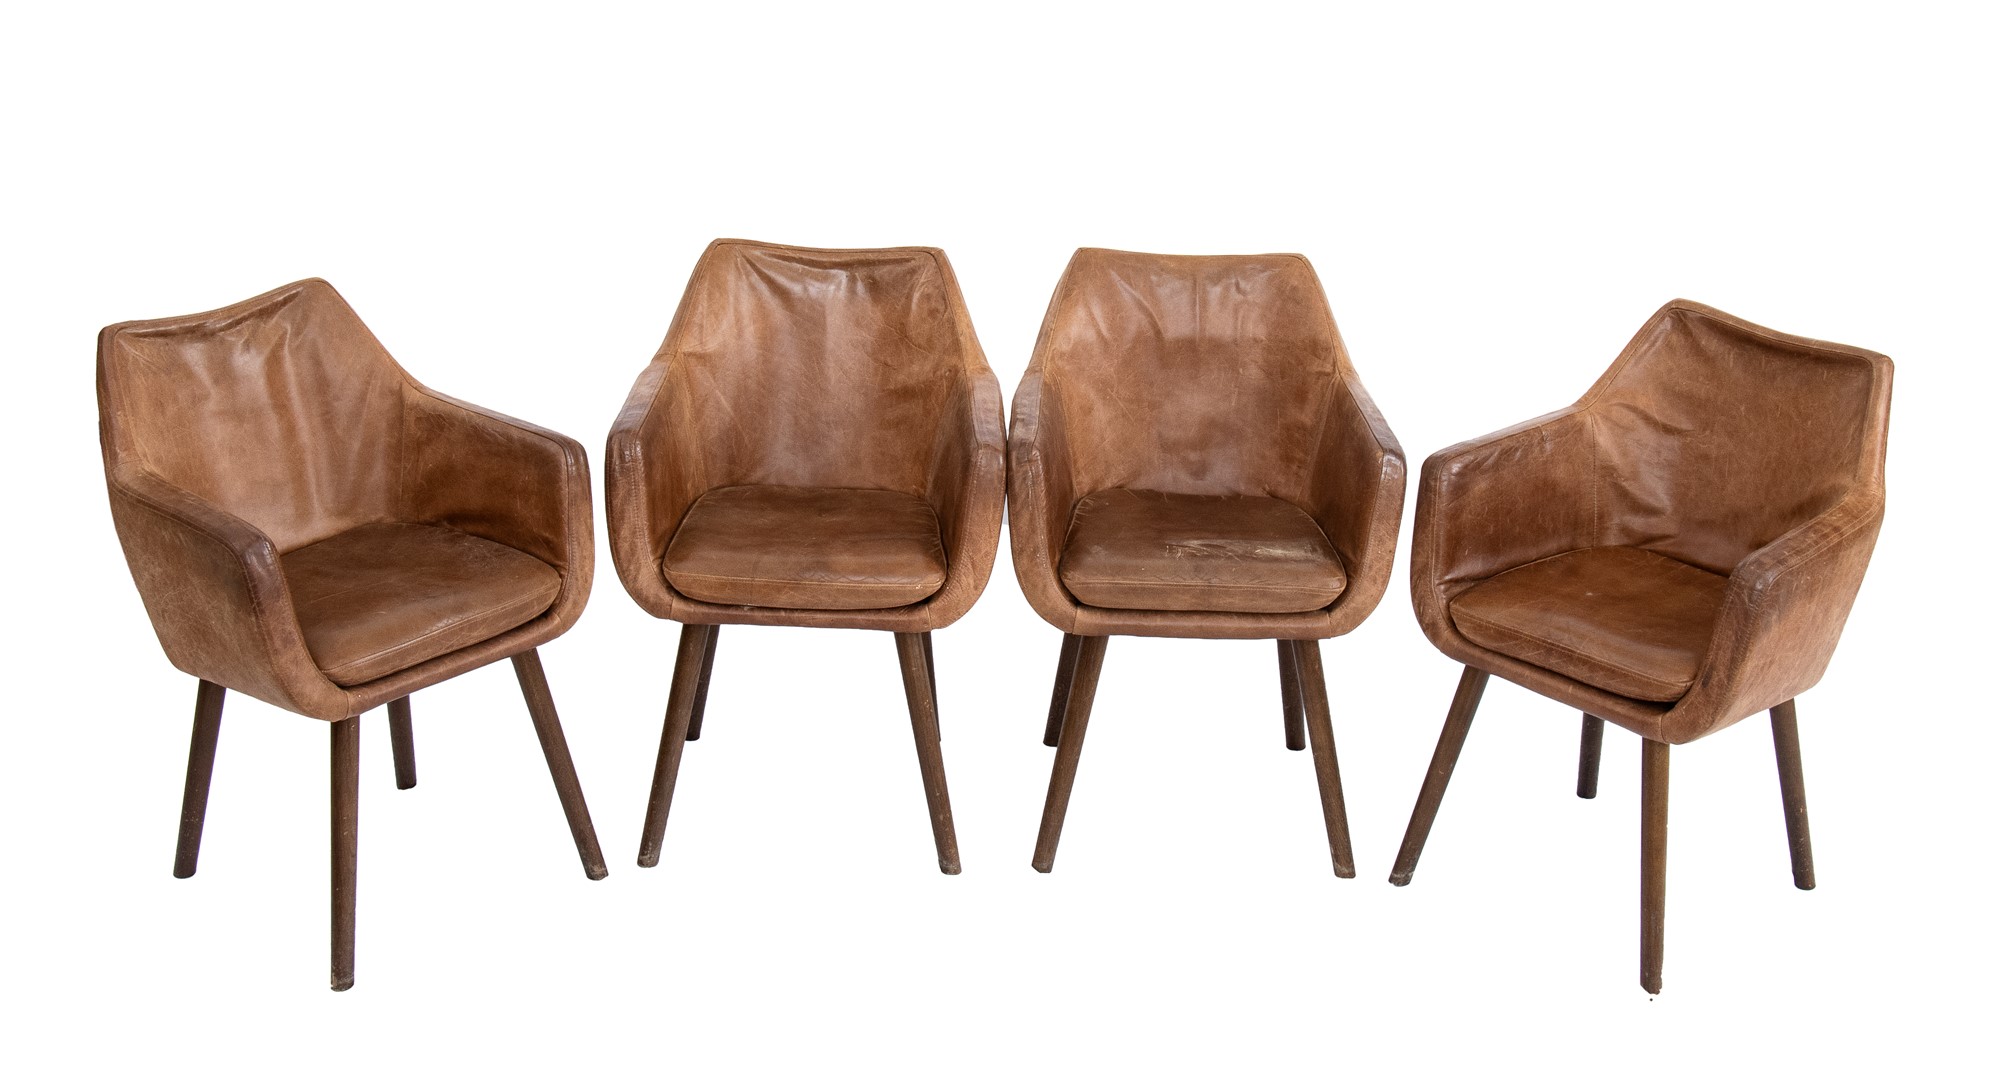 4 leather chairs. 20th century English manufacture - Image 7 of 19